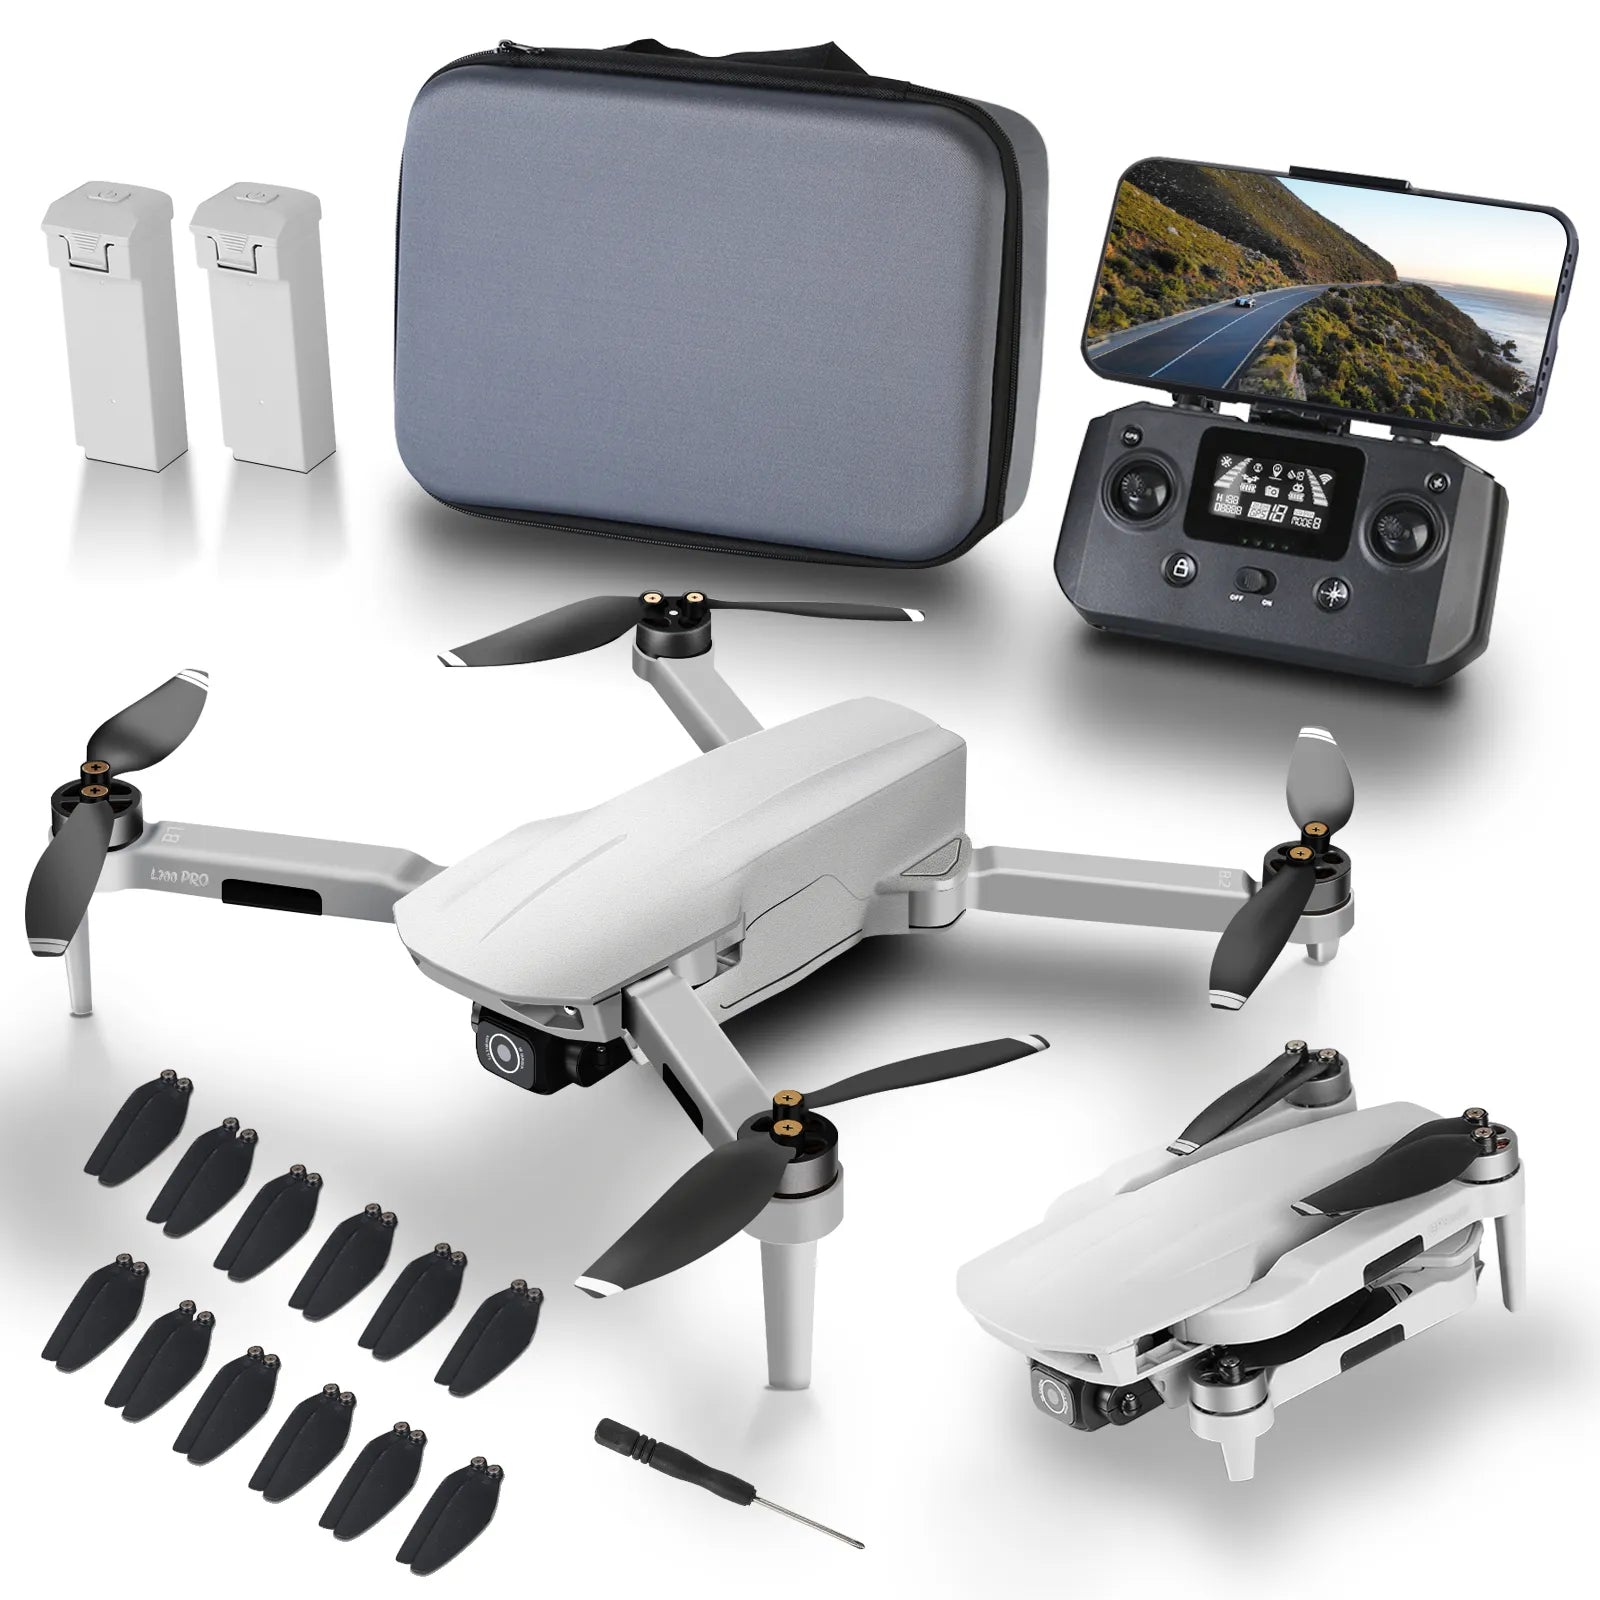 Drone  UAV (Unmanned Aerial Vehicle)  Quadcopter  Aerial photography  Remote control drone  Drone technology  Drone pilot  Drone flying  Drone videography  Drone racing  Drone regulations  Drone hobbyist  FPV (First-Person View) drone  Drone camera  Drone accessories  DJI (a popular drone brand)  Drone footage  Drone industry  Drone innovation